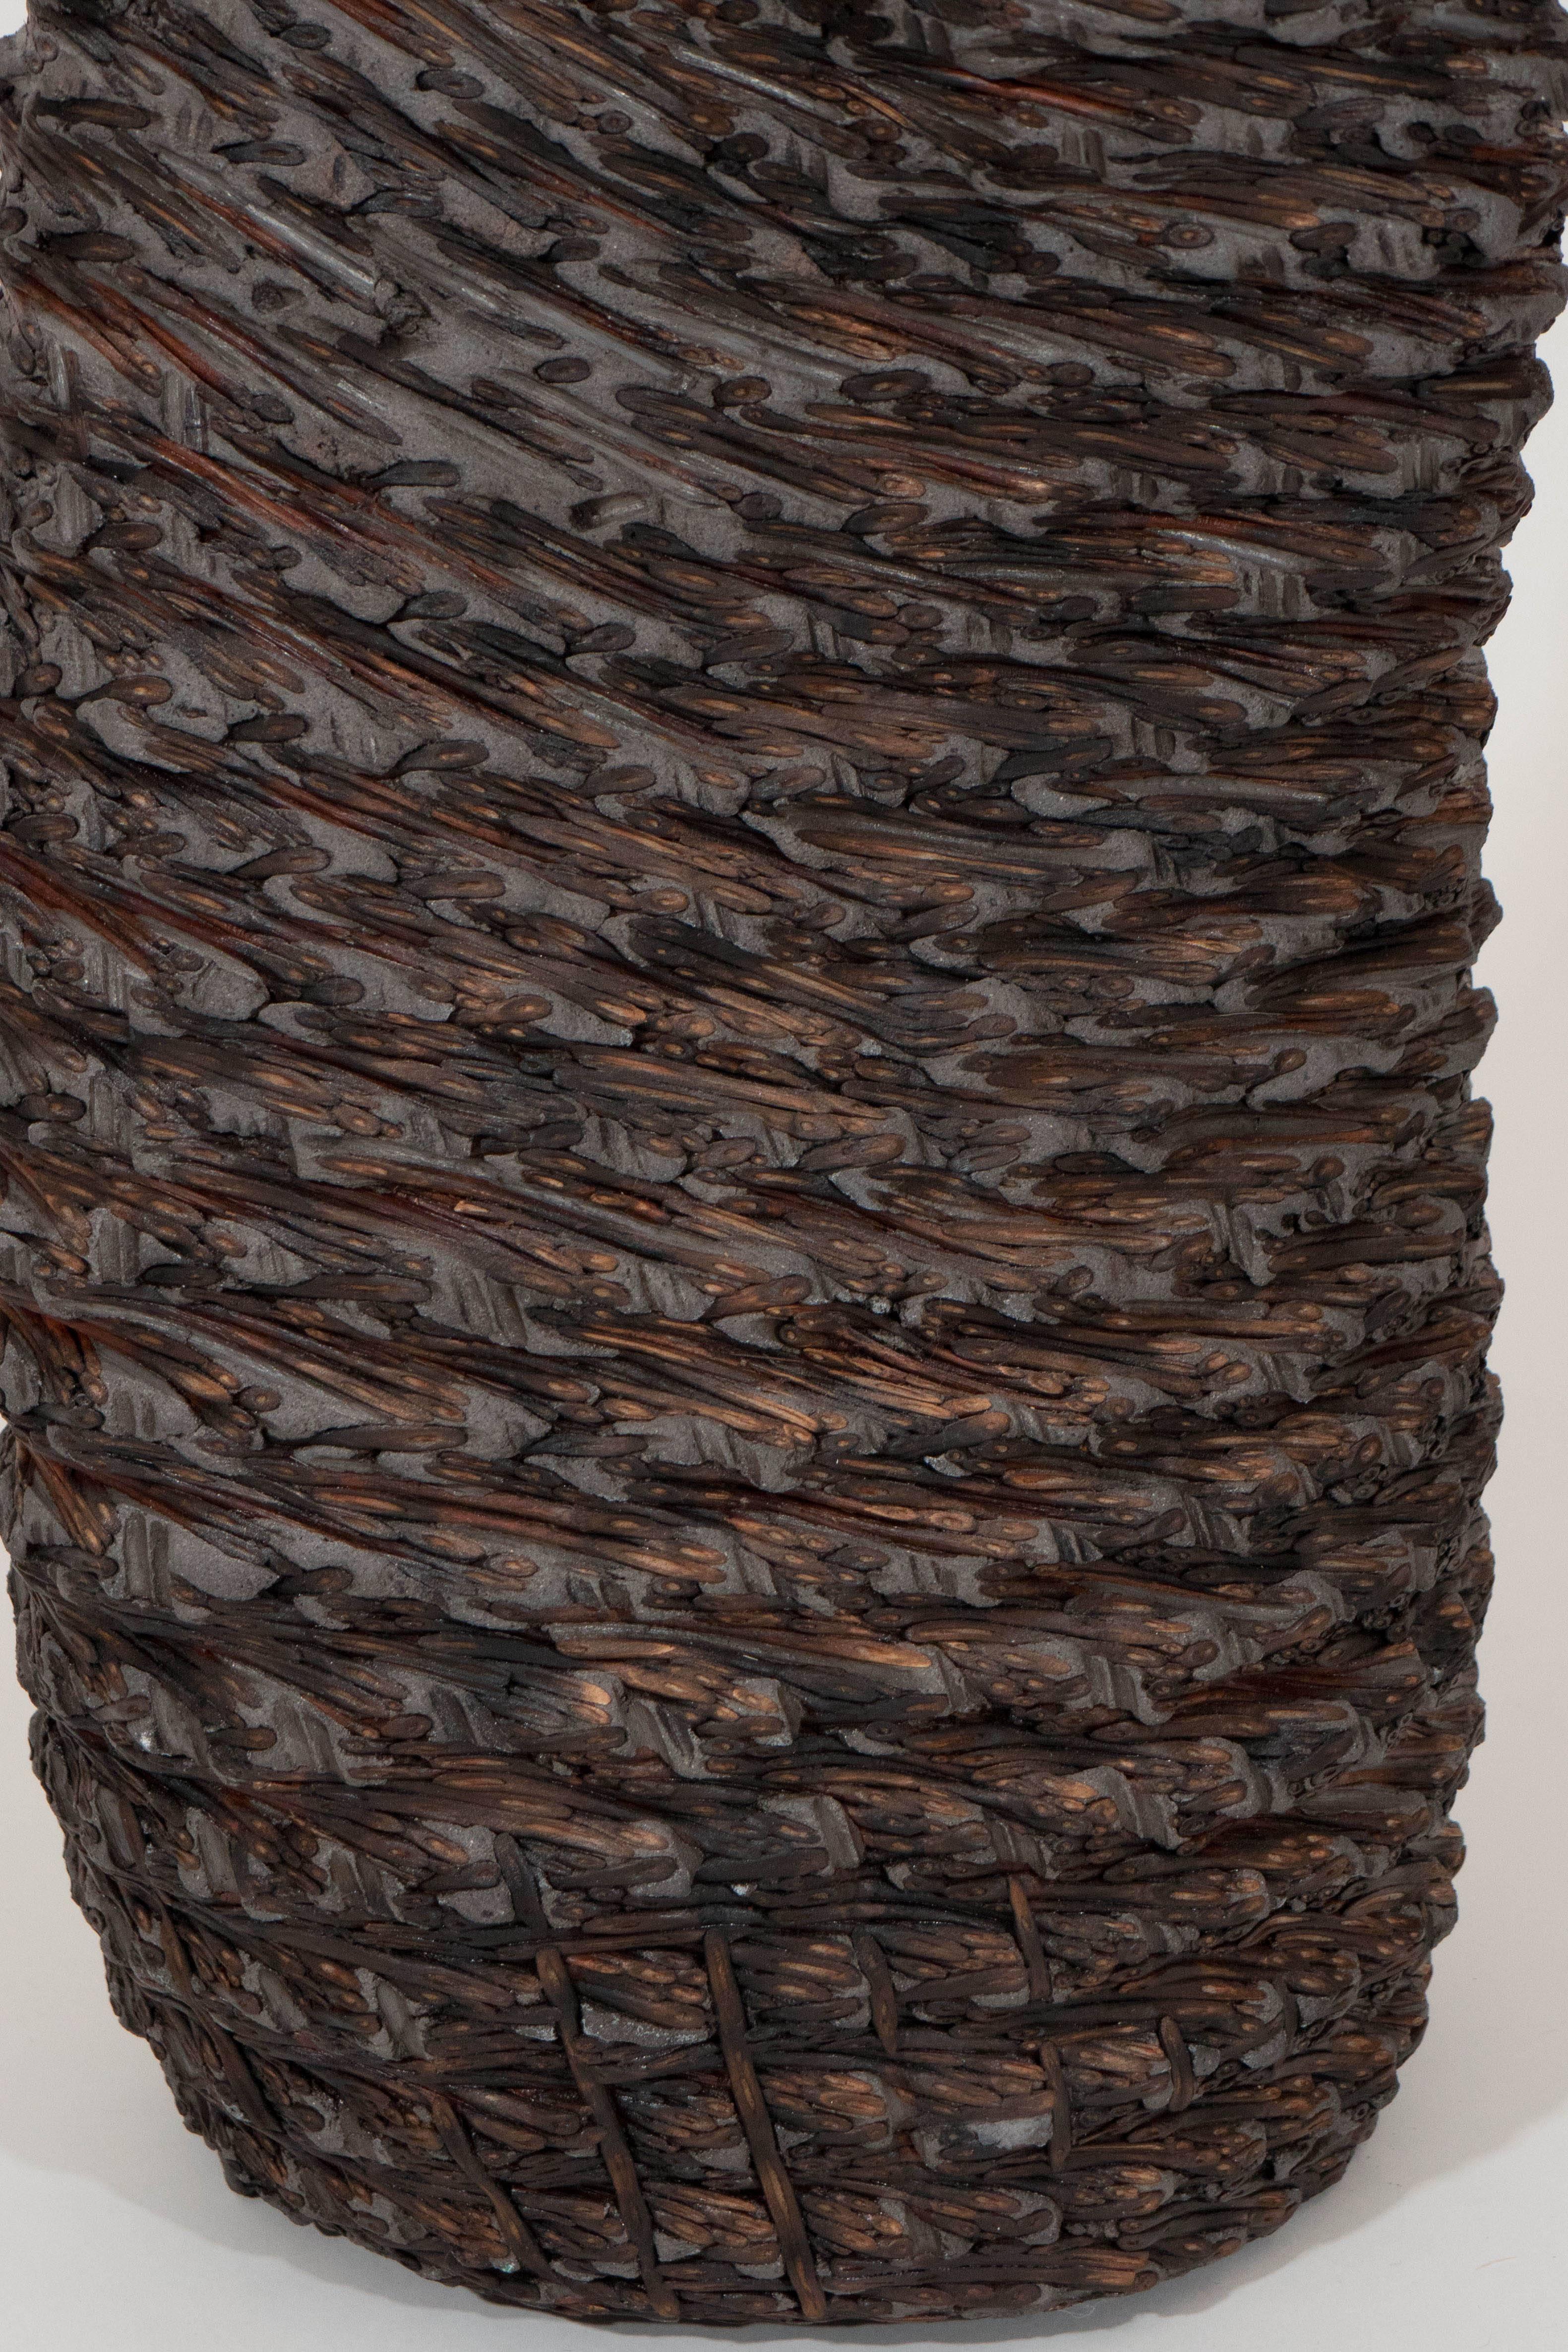 Trained as a basket maker in Germany during the 1980s, Klaus Titze combines technology and artisanal tradition with his concrete basket forms. Organically shaped wicker forms are made using a special twisting technique and brushed with fiber mortar.